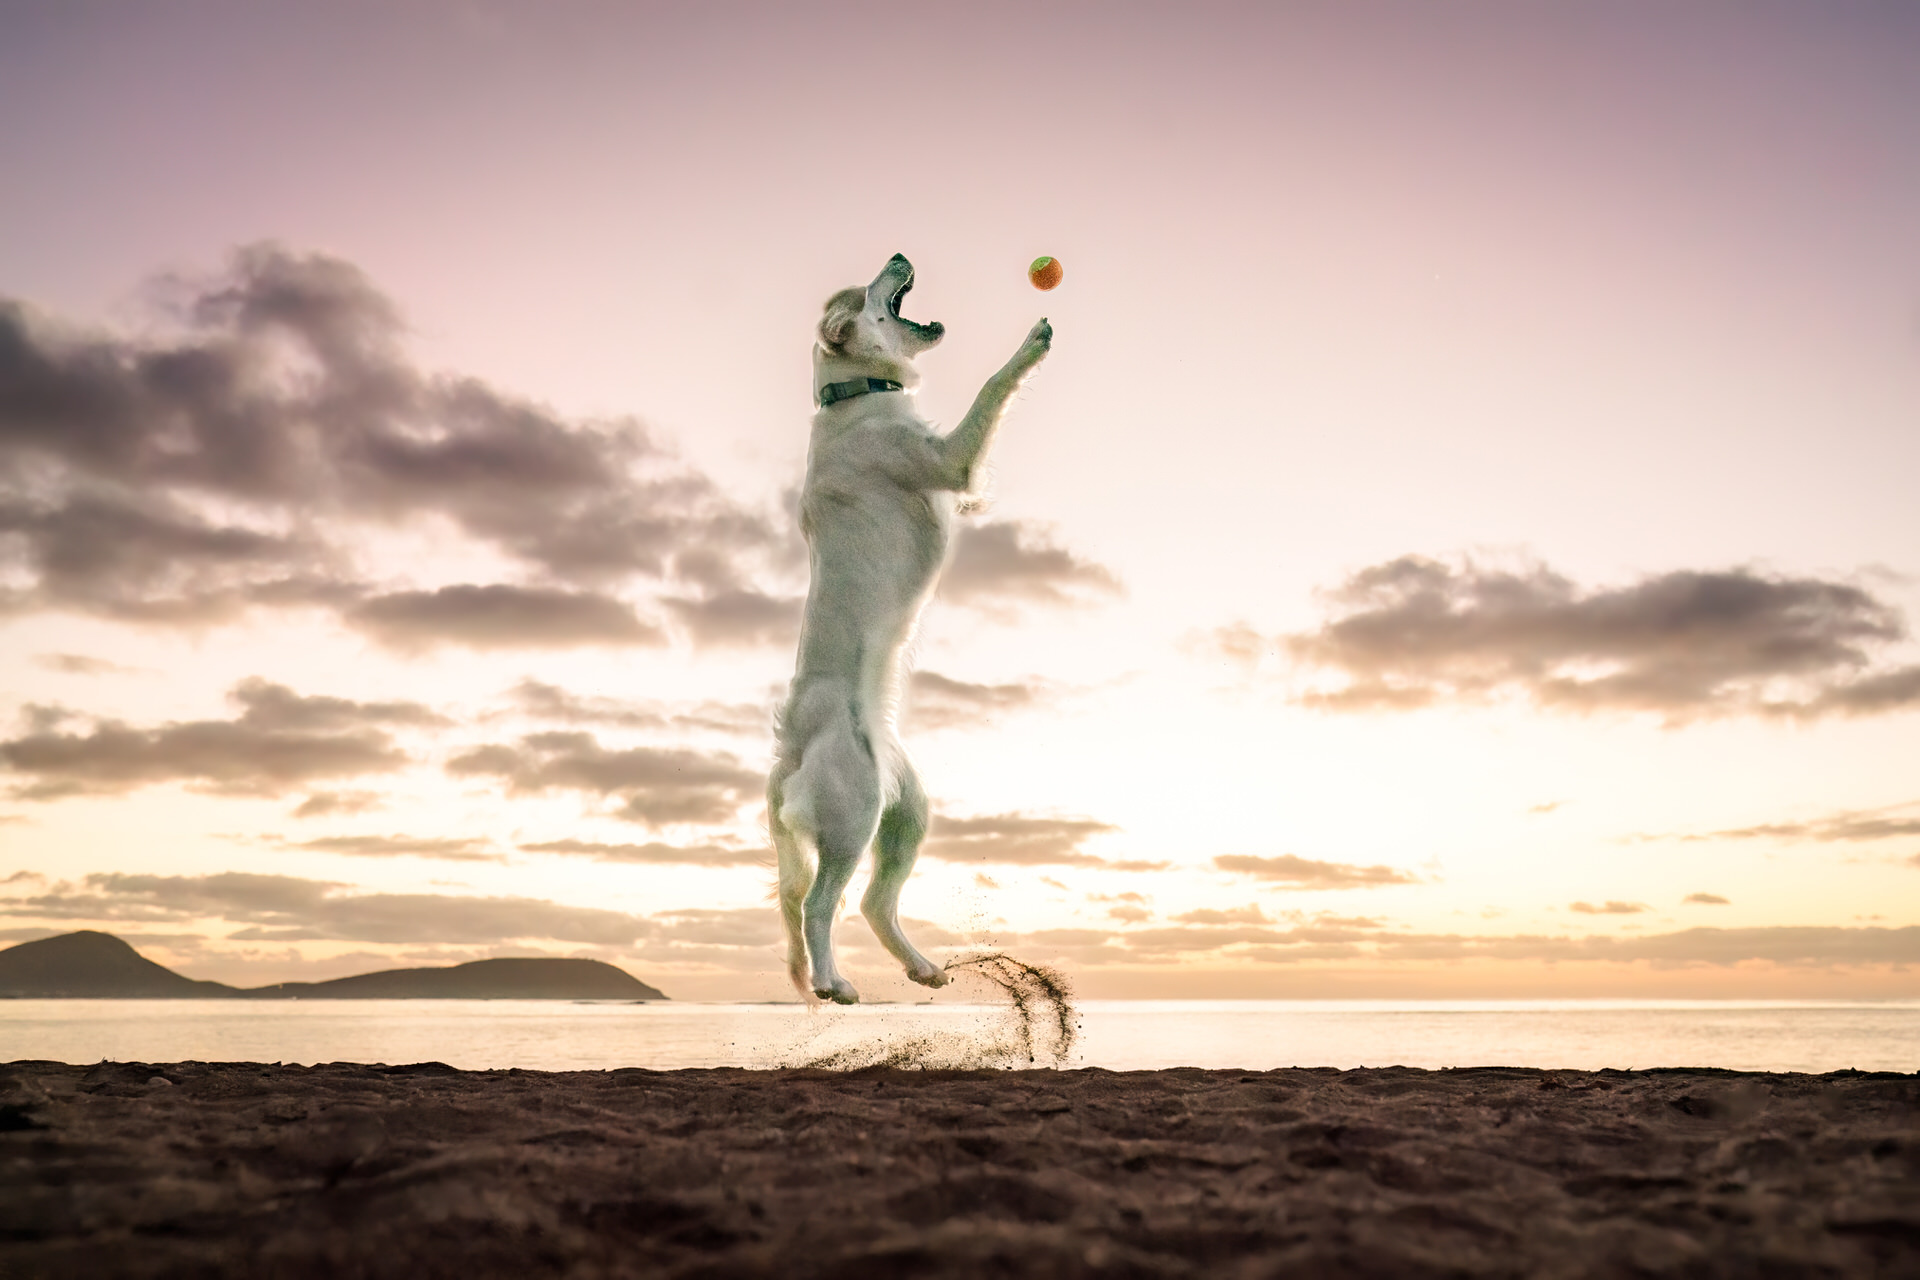 Dog jumping to catch ball at beach sunset in Hawaii.